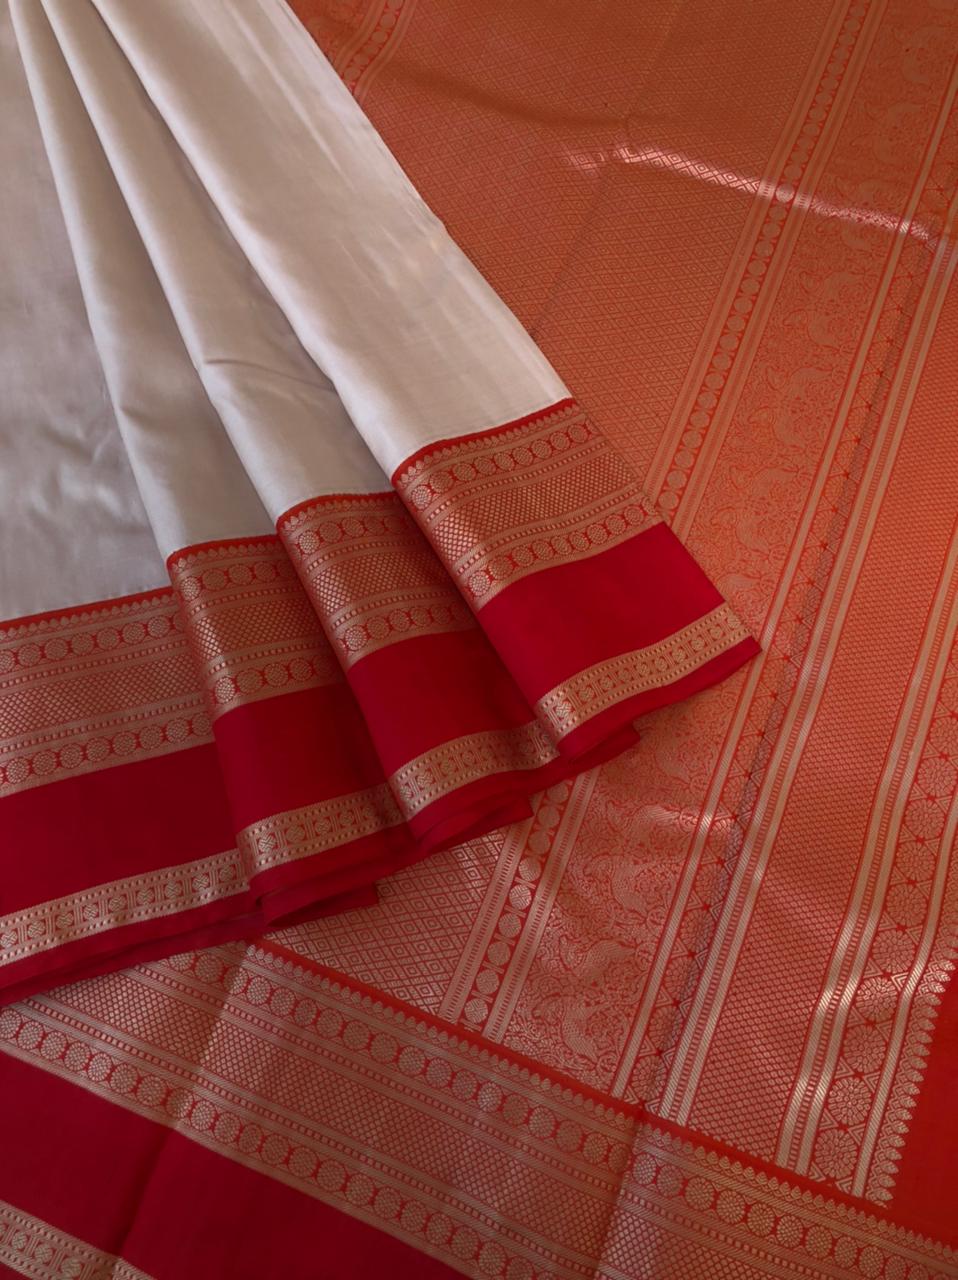 Varam - Kanchivarams Inspired from our Grandmother’s Trunk - one of a kind ivory off white and red/orange no zari korvai Kanchivaram with intricate woven pallu